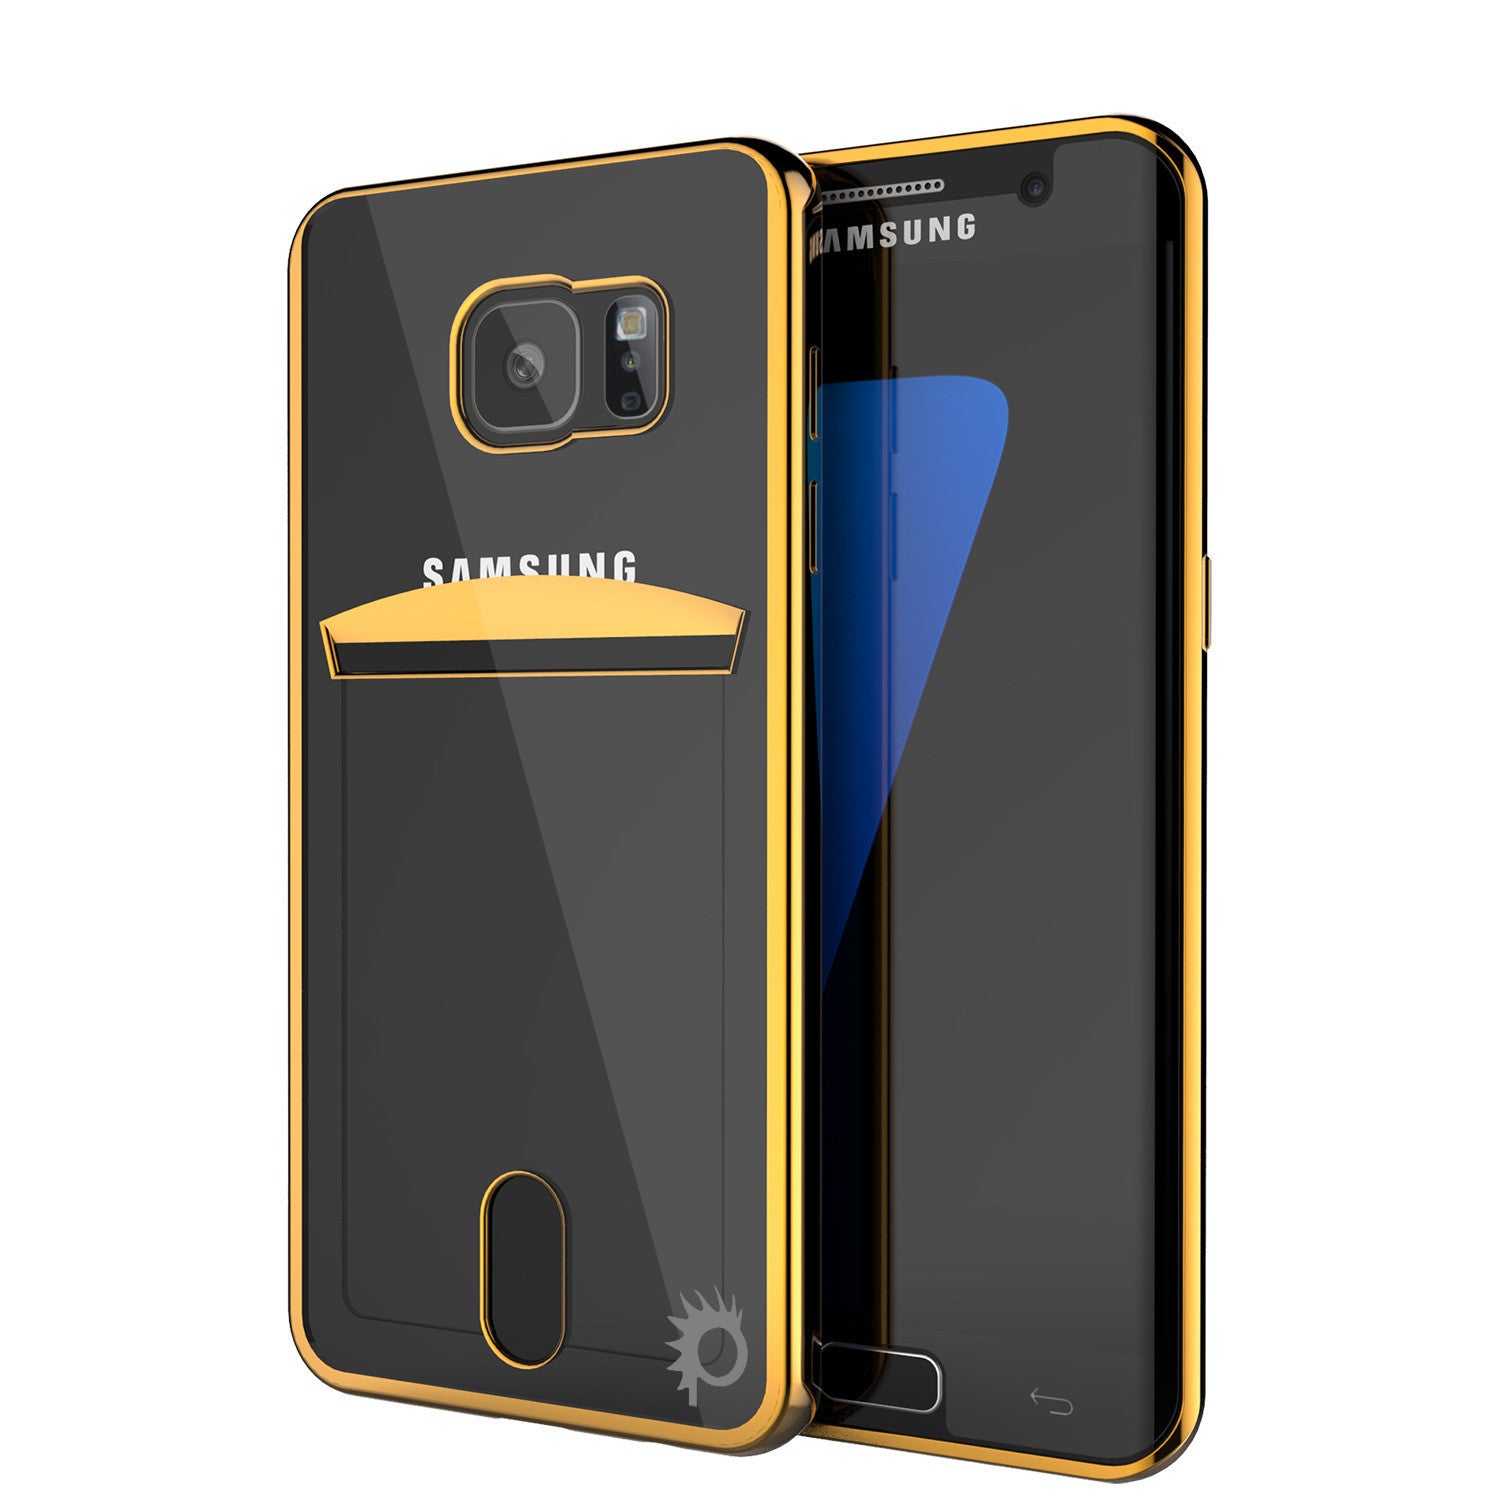 Galaxy S7 Case, PUNKCASE® LUCID Gold Series | Card Slot | SHIELD Screen Protector | Ultra fit (Color in image: Gold)